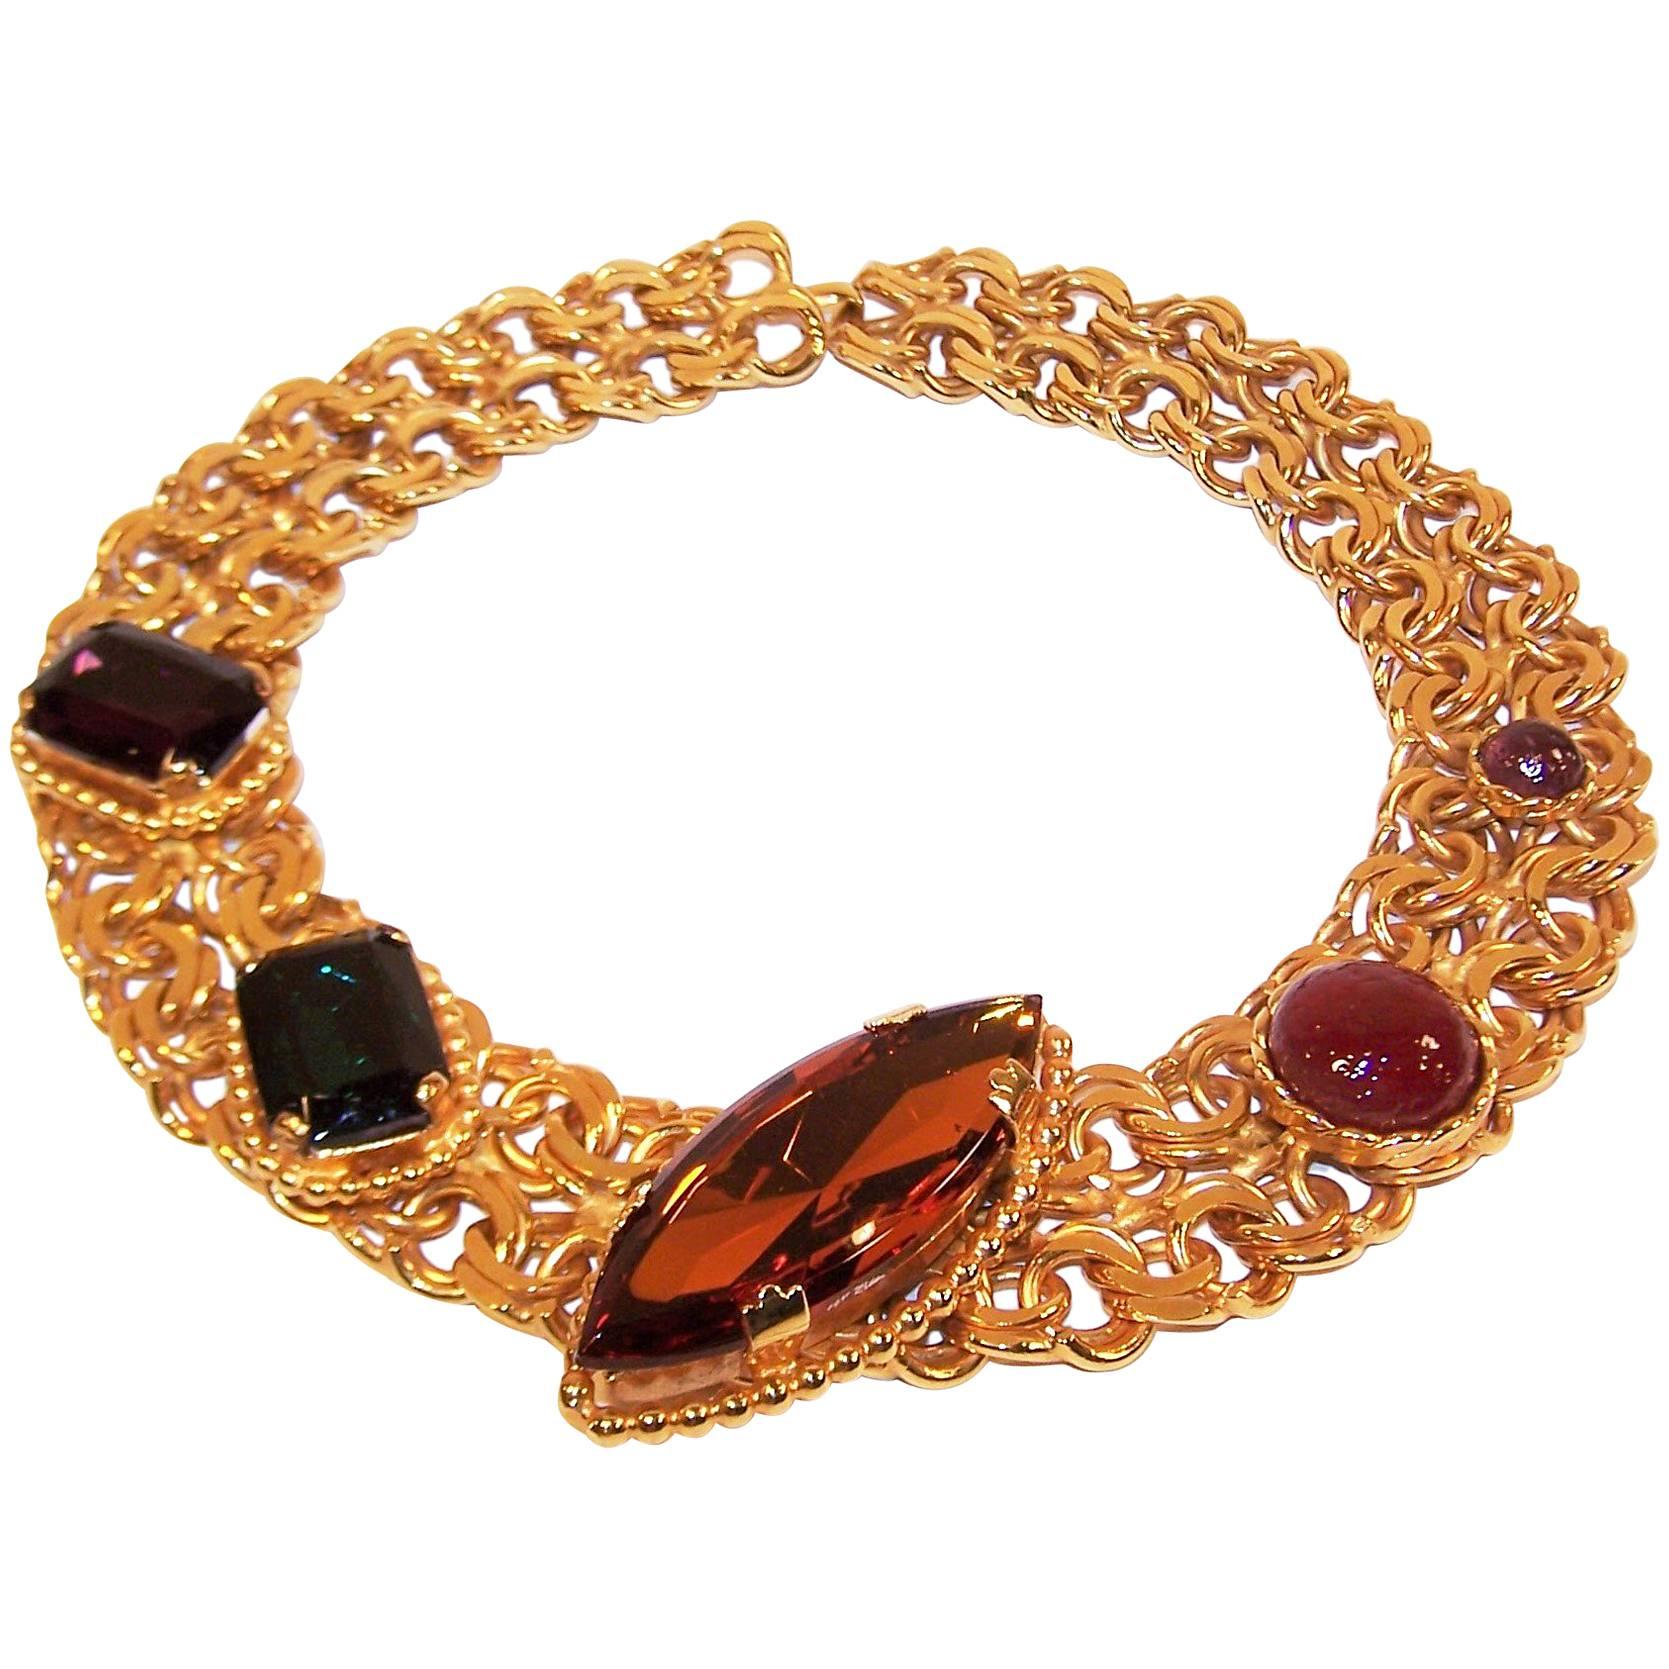 Stunning 1980's Dominique Aurientis Gold Collar Necklace With Gripoix Glass